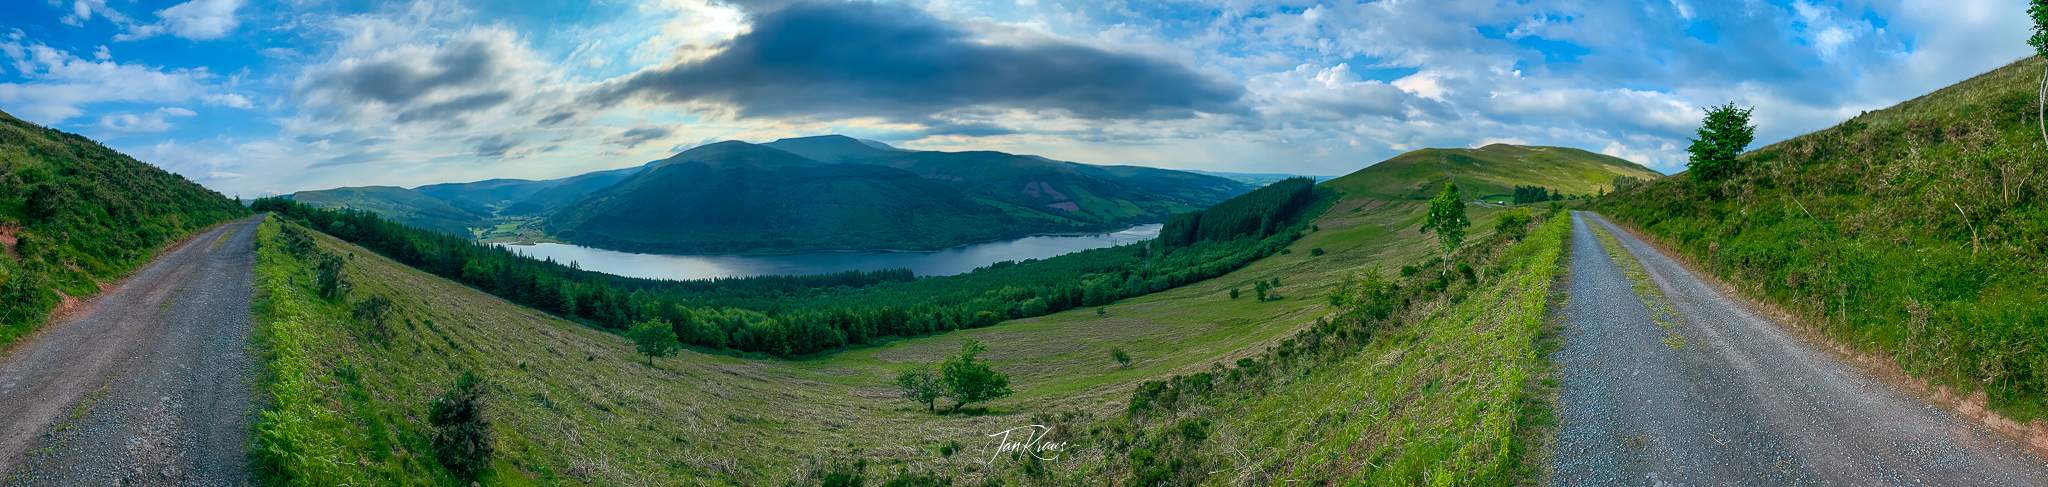 Panoramic view above Talybont Reservoir, Day 3 of the Beacons Way hike, Wales, UK